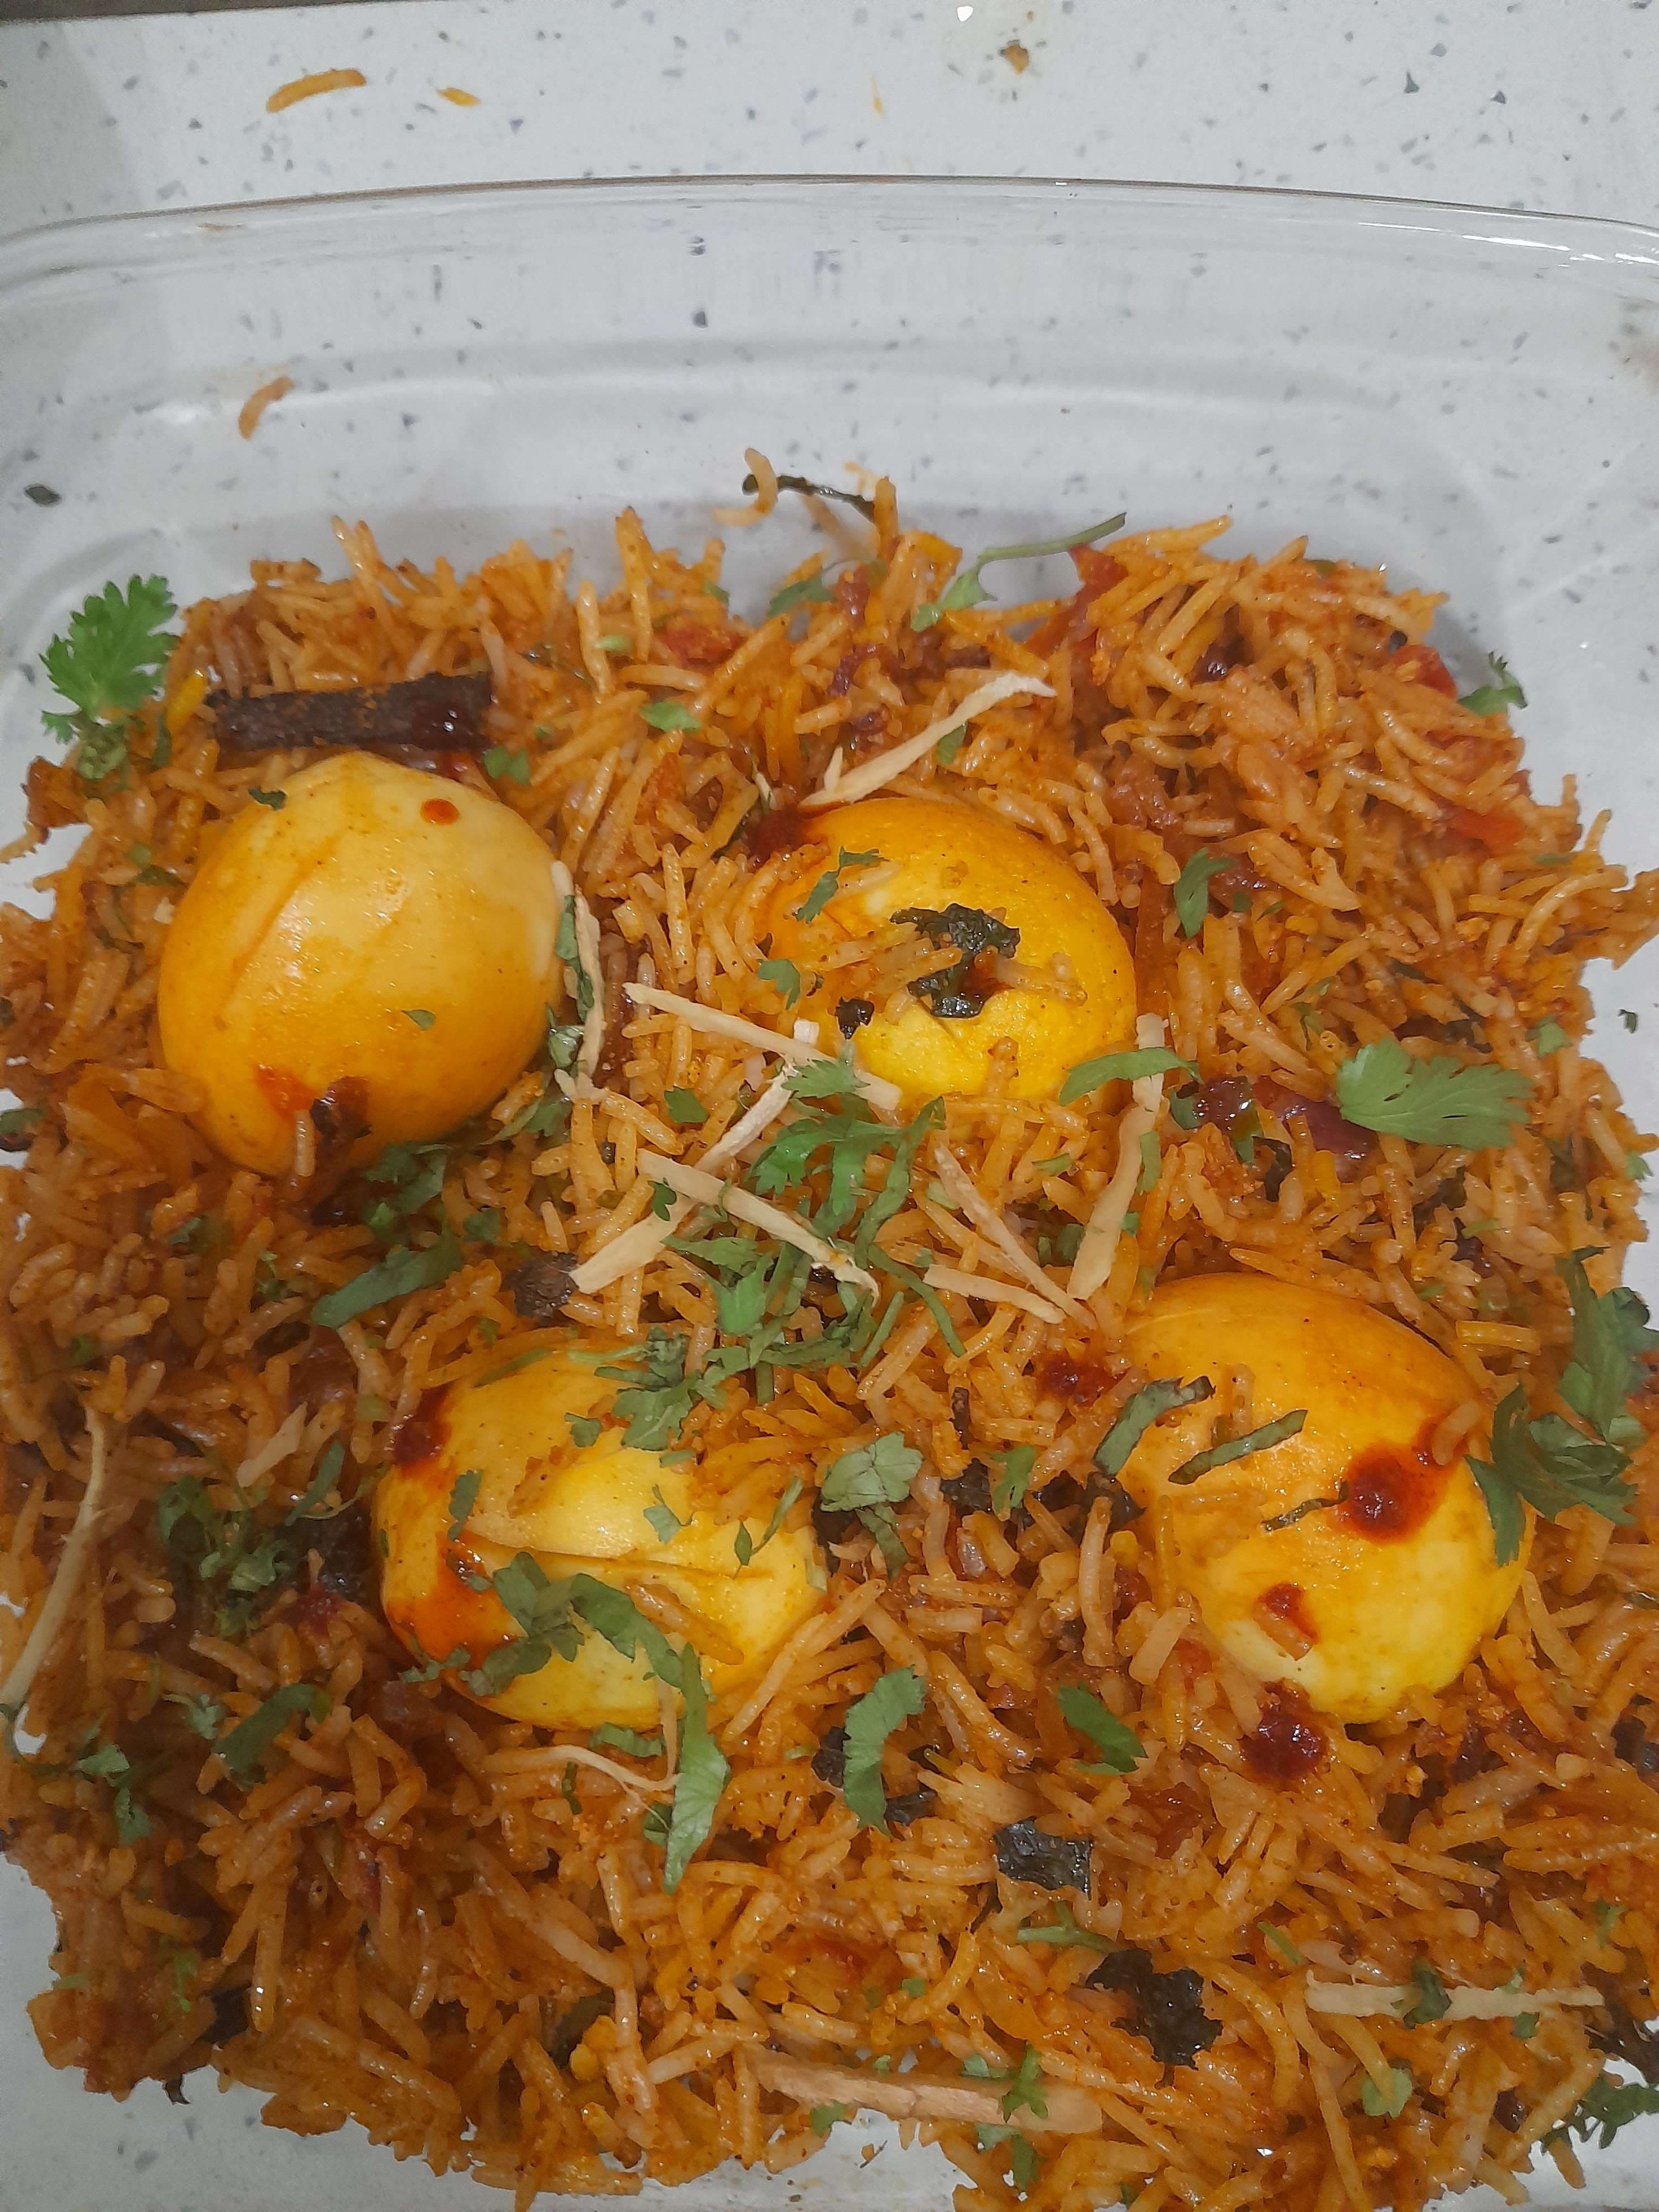 Tasty Egg Biryani cooked by COOX chefs cooks during occasions parties events at home